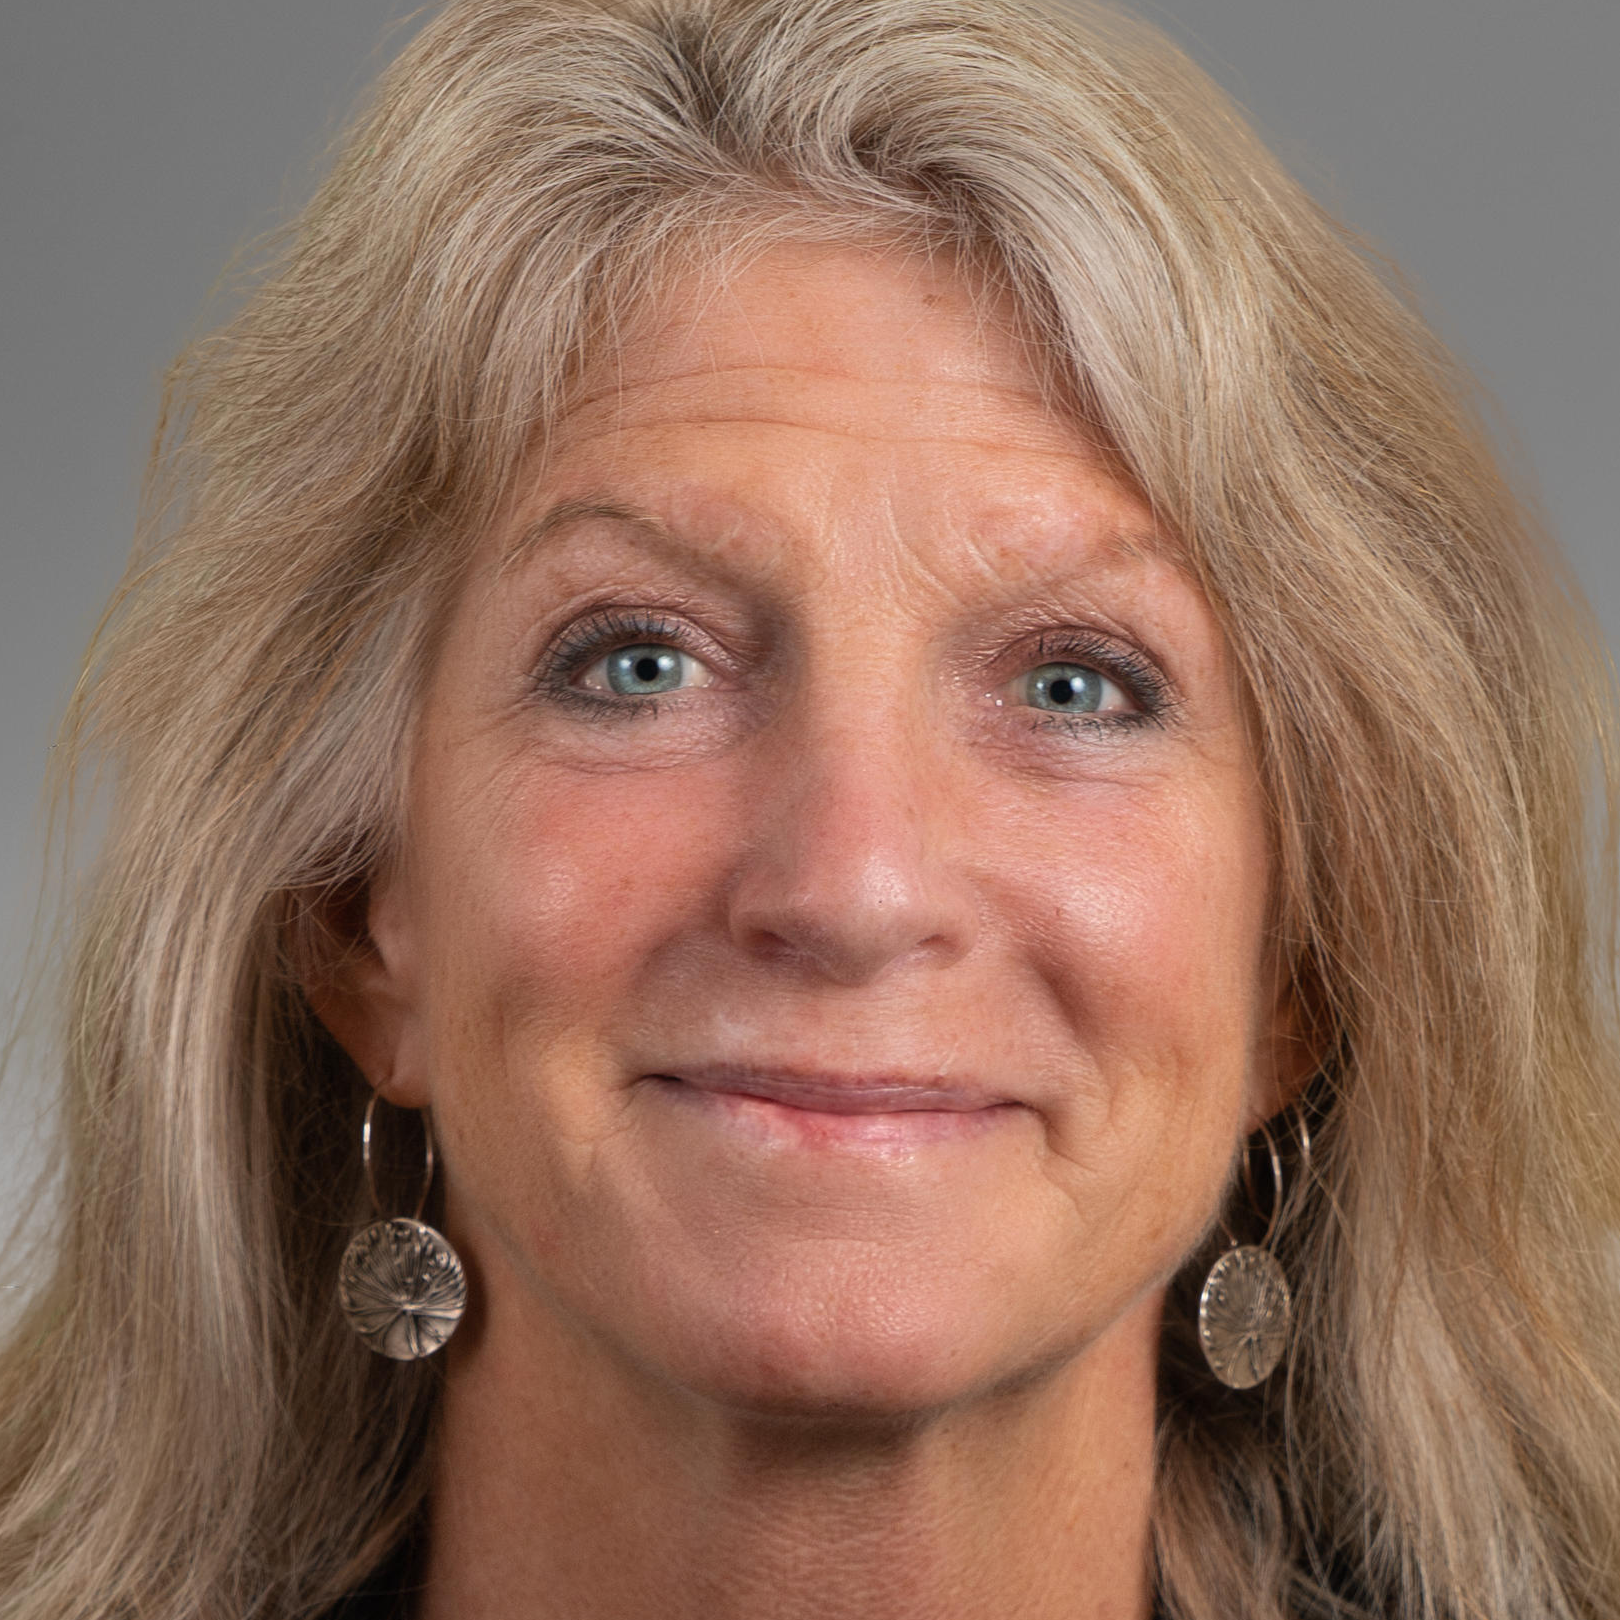 Image of Shelly Marie Mahowald, APRN, CNP, FNP